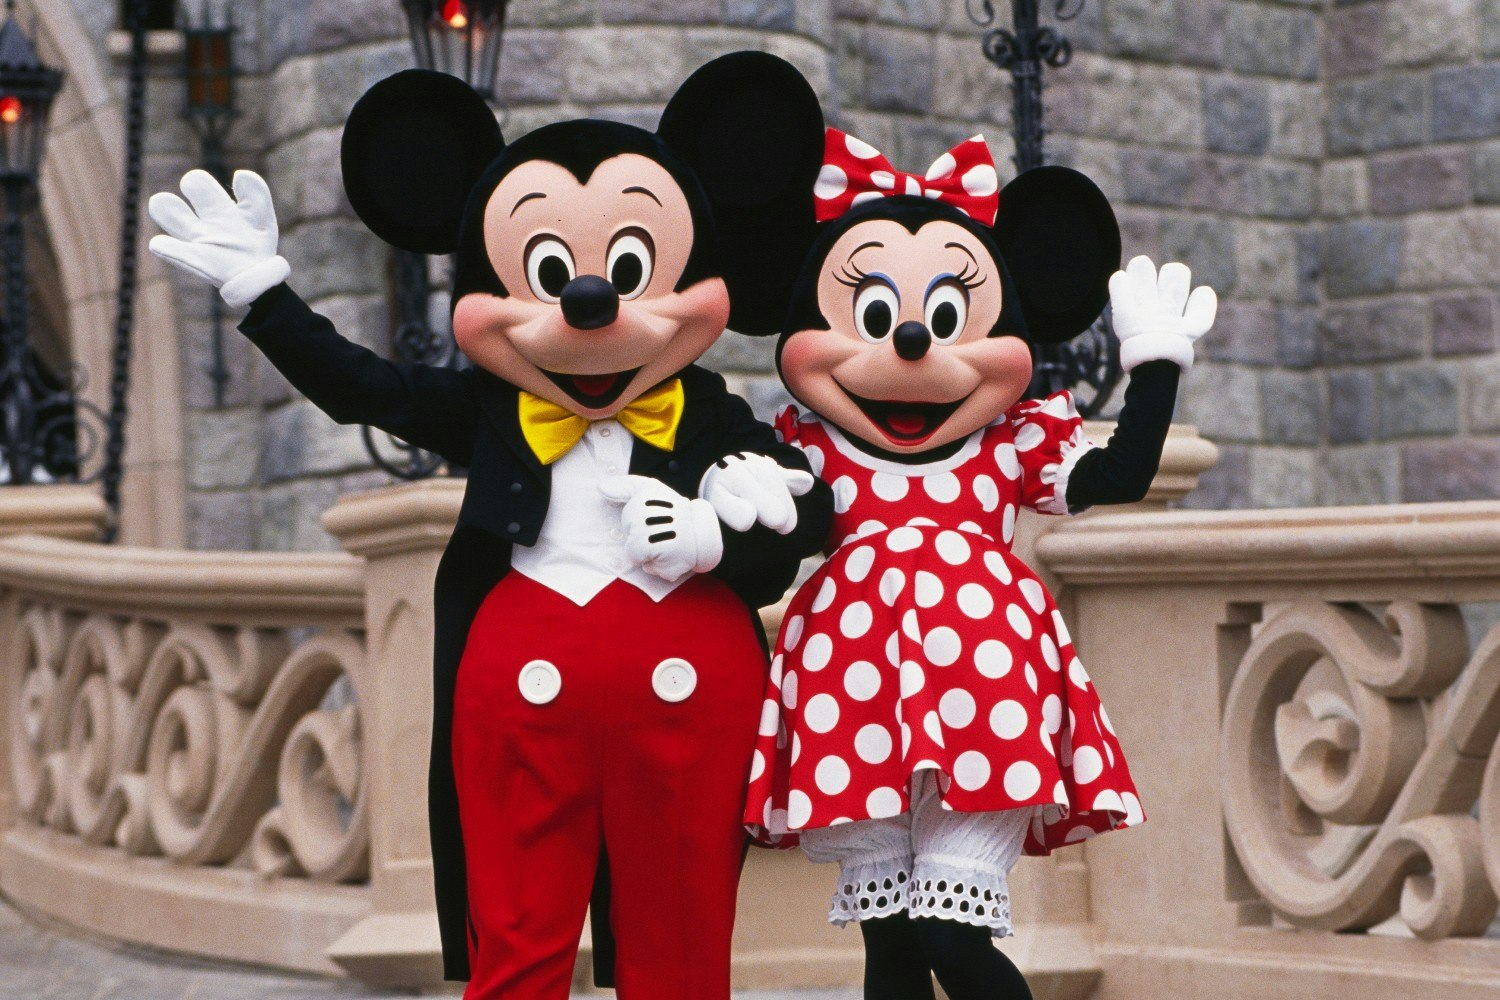 Mickey and Minnie characters at Disneyland